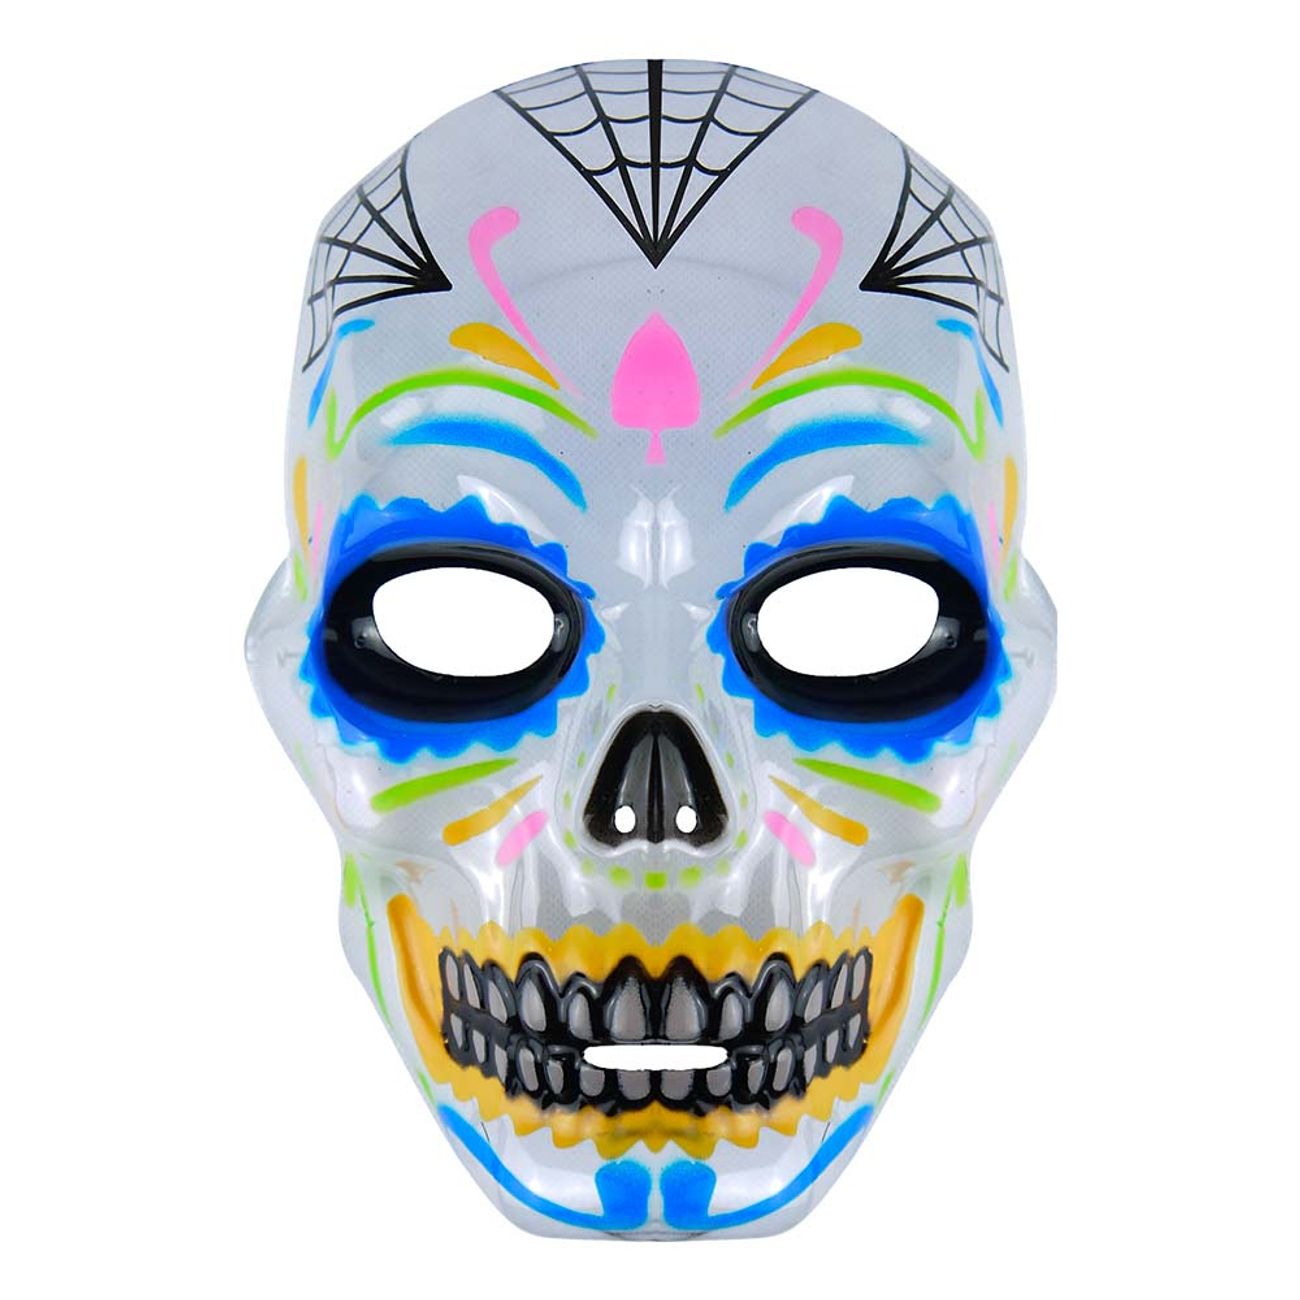 day-of-the-dead-mask-i-plast-96777-1